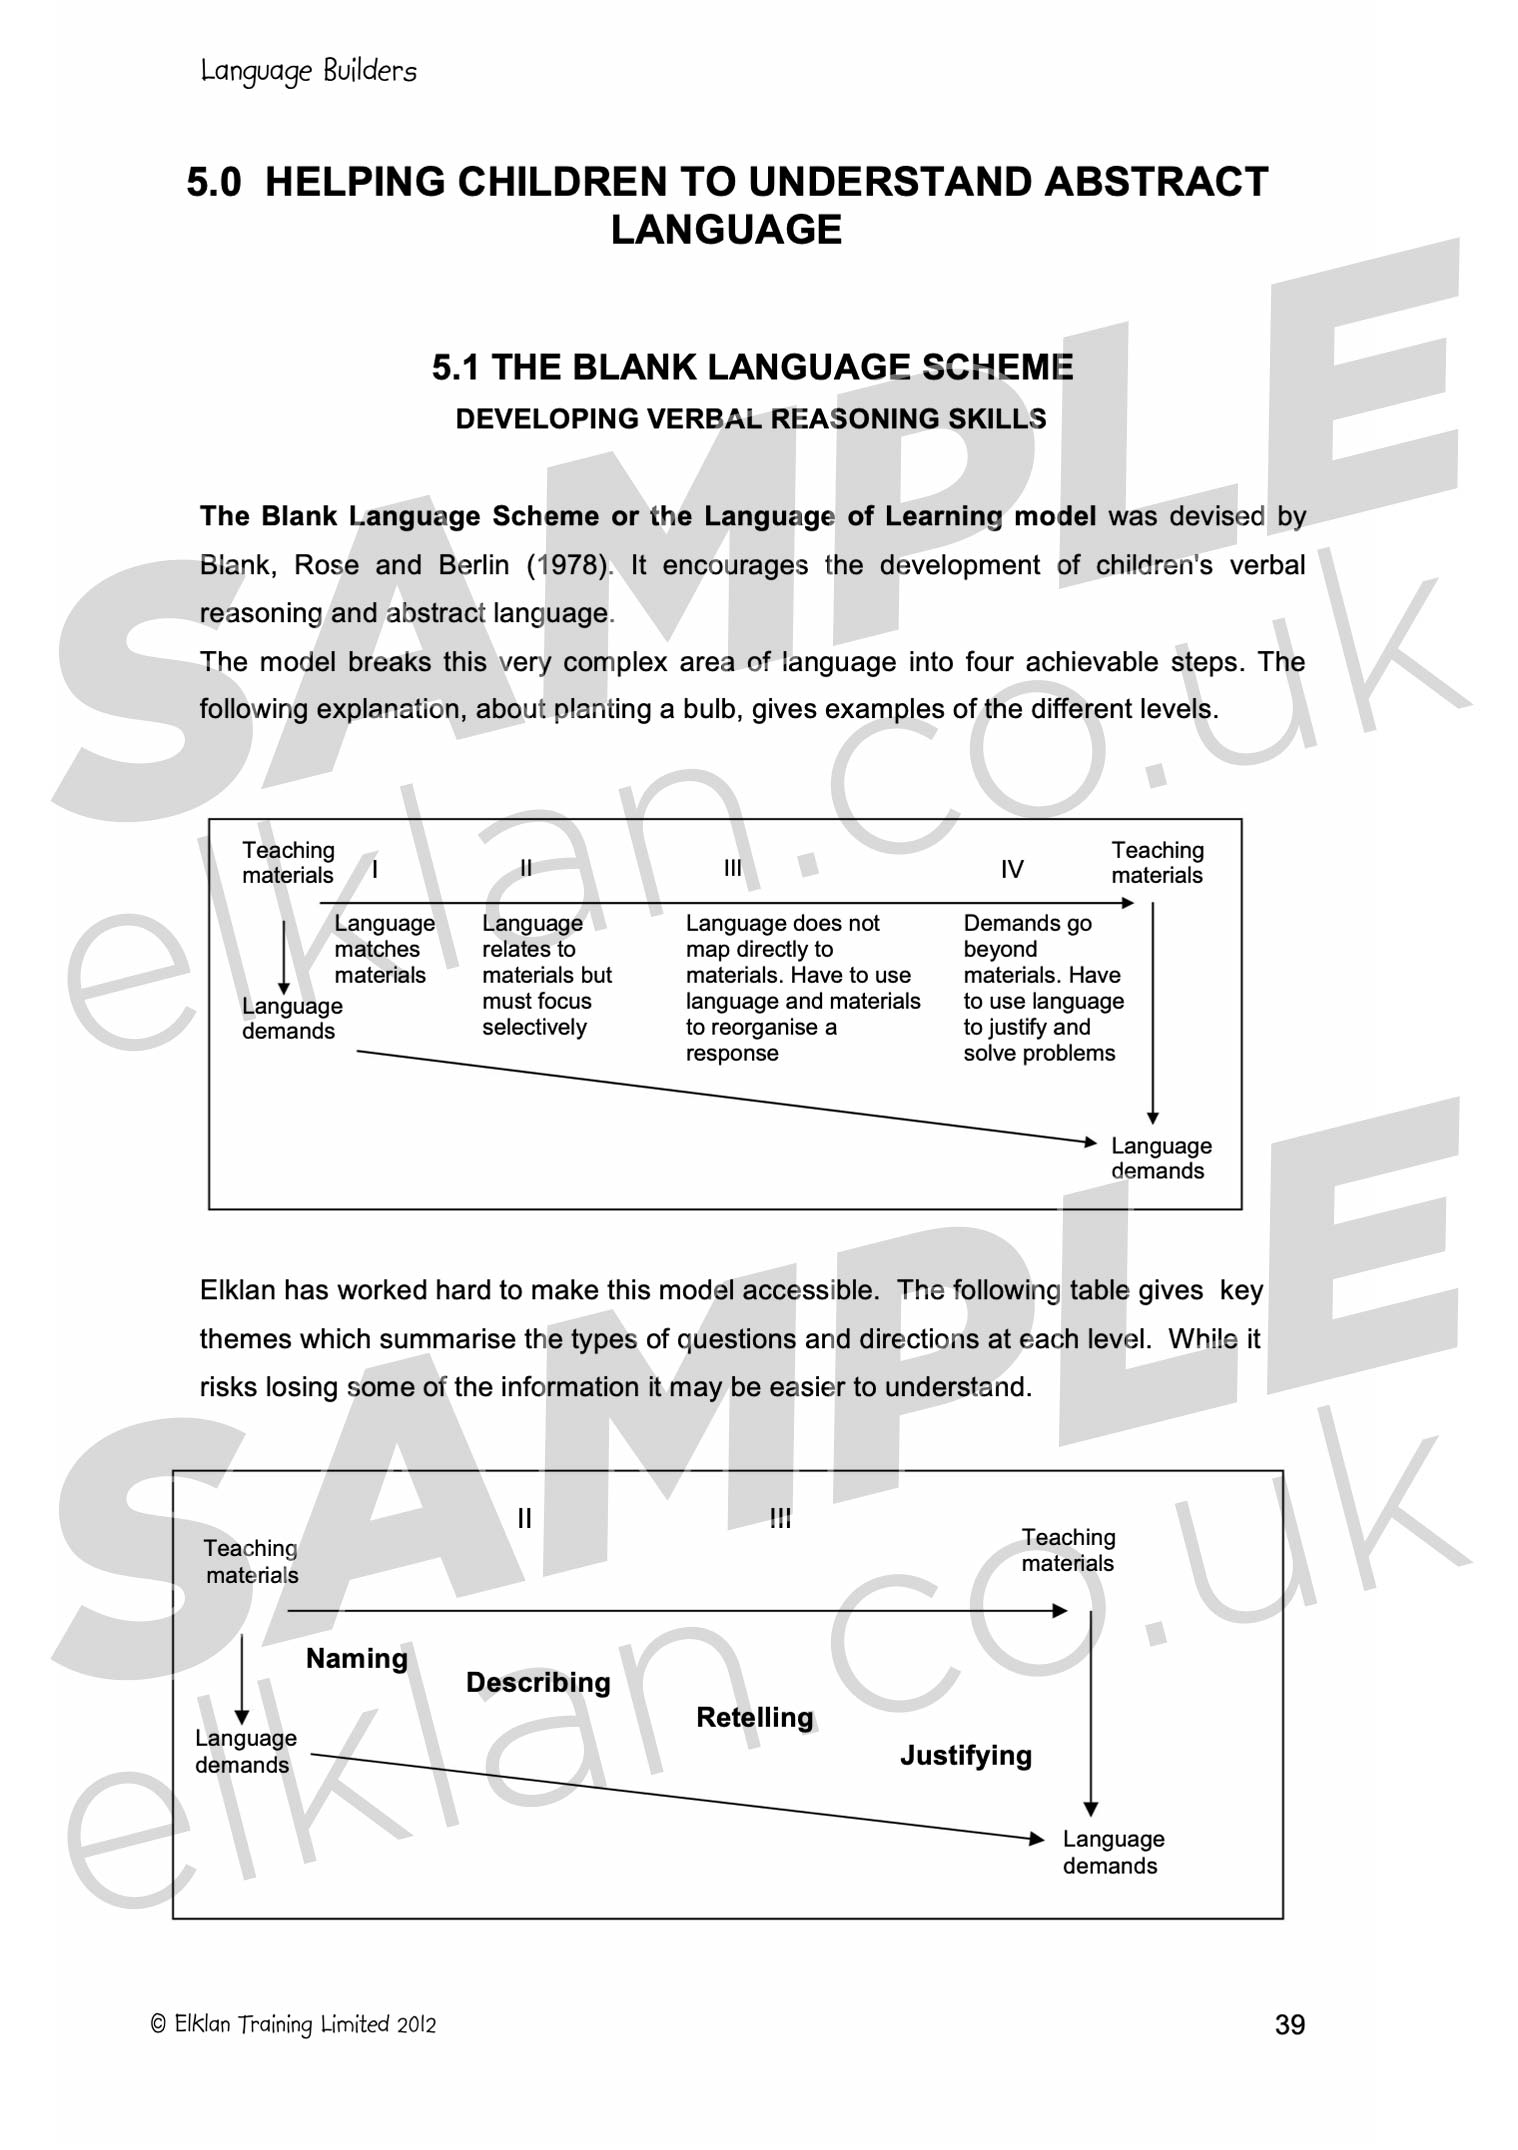 Language Builders for 5-11s sample image